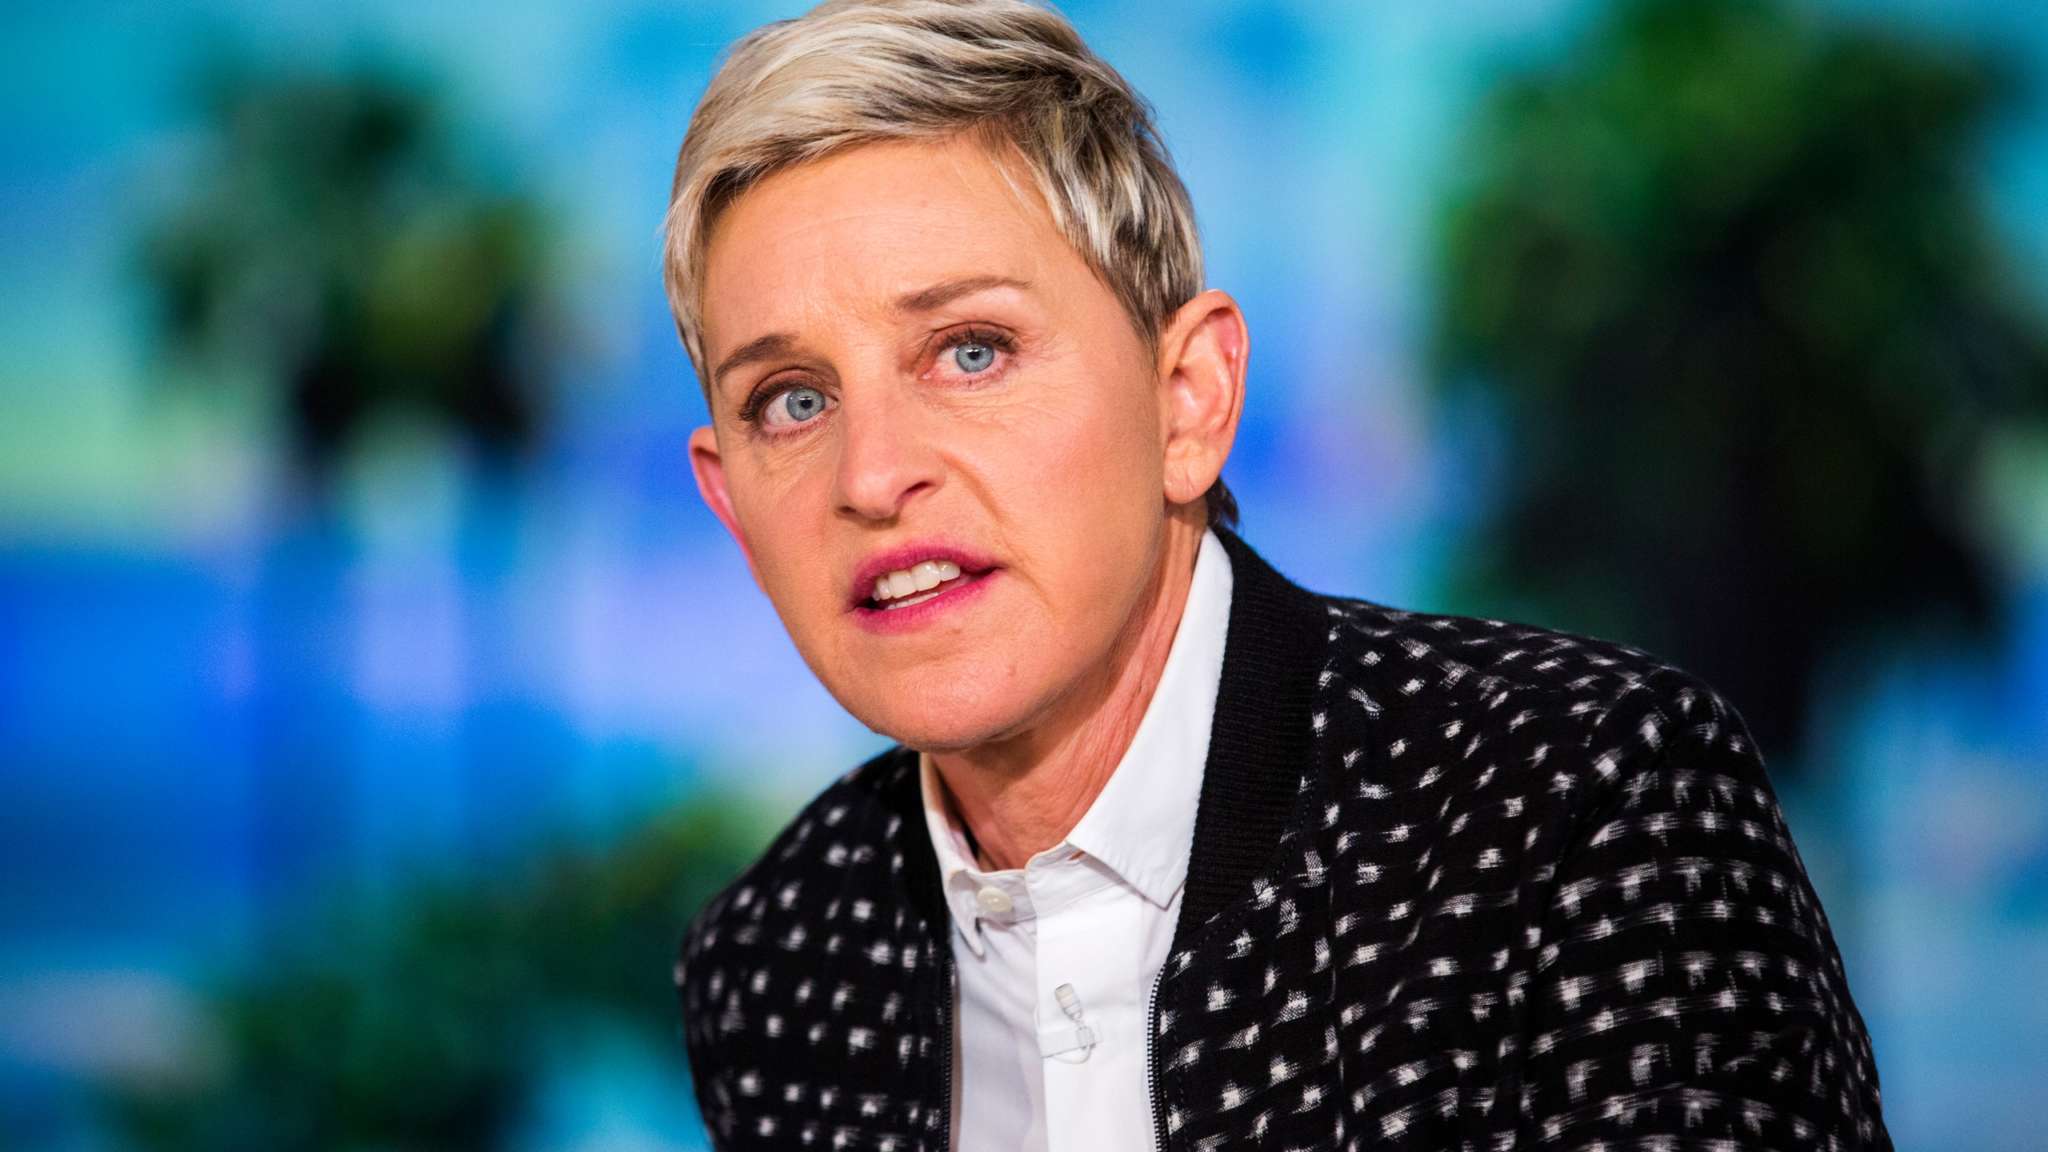 ”ellen-degeneres-says-shes-disappointed-in-first-statement-on-the-mistreatment-of-her-talk-shows-employees”